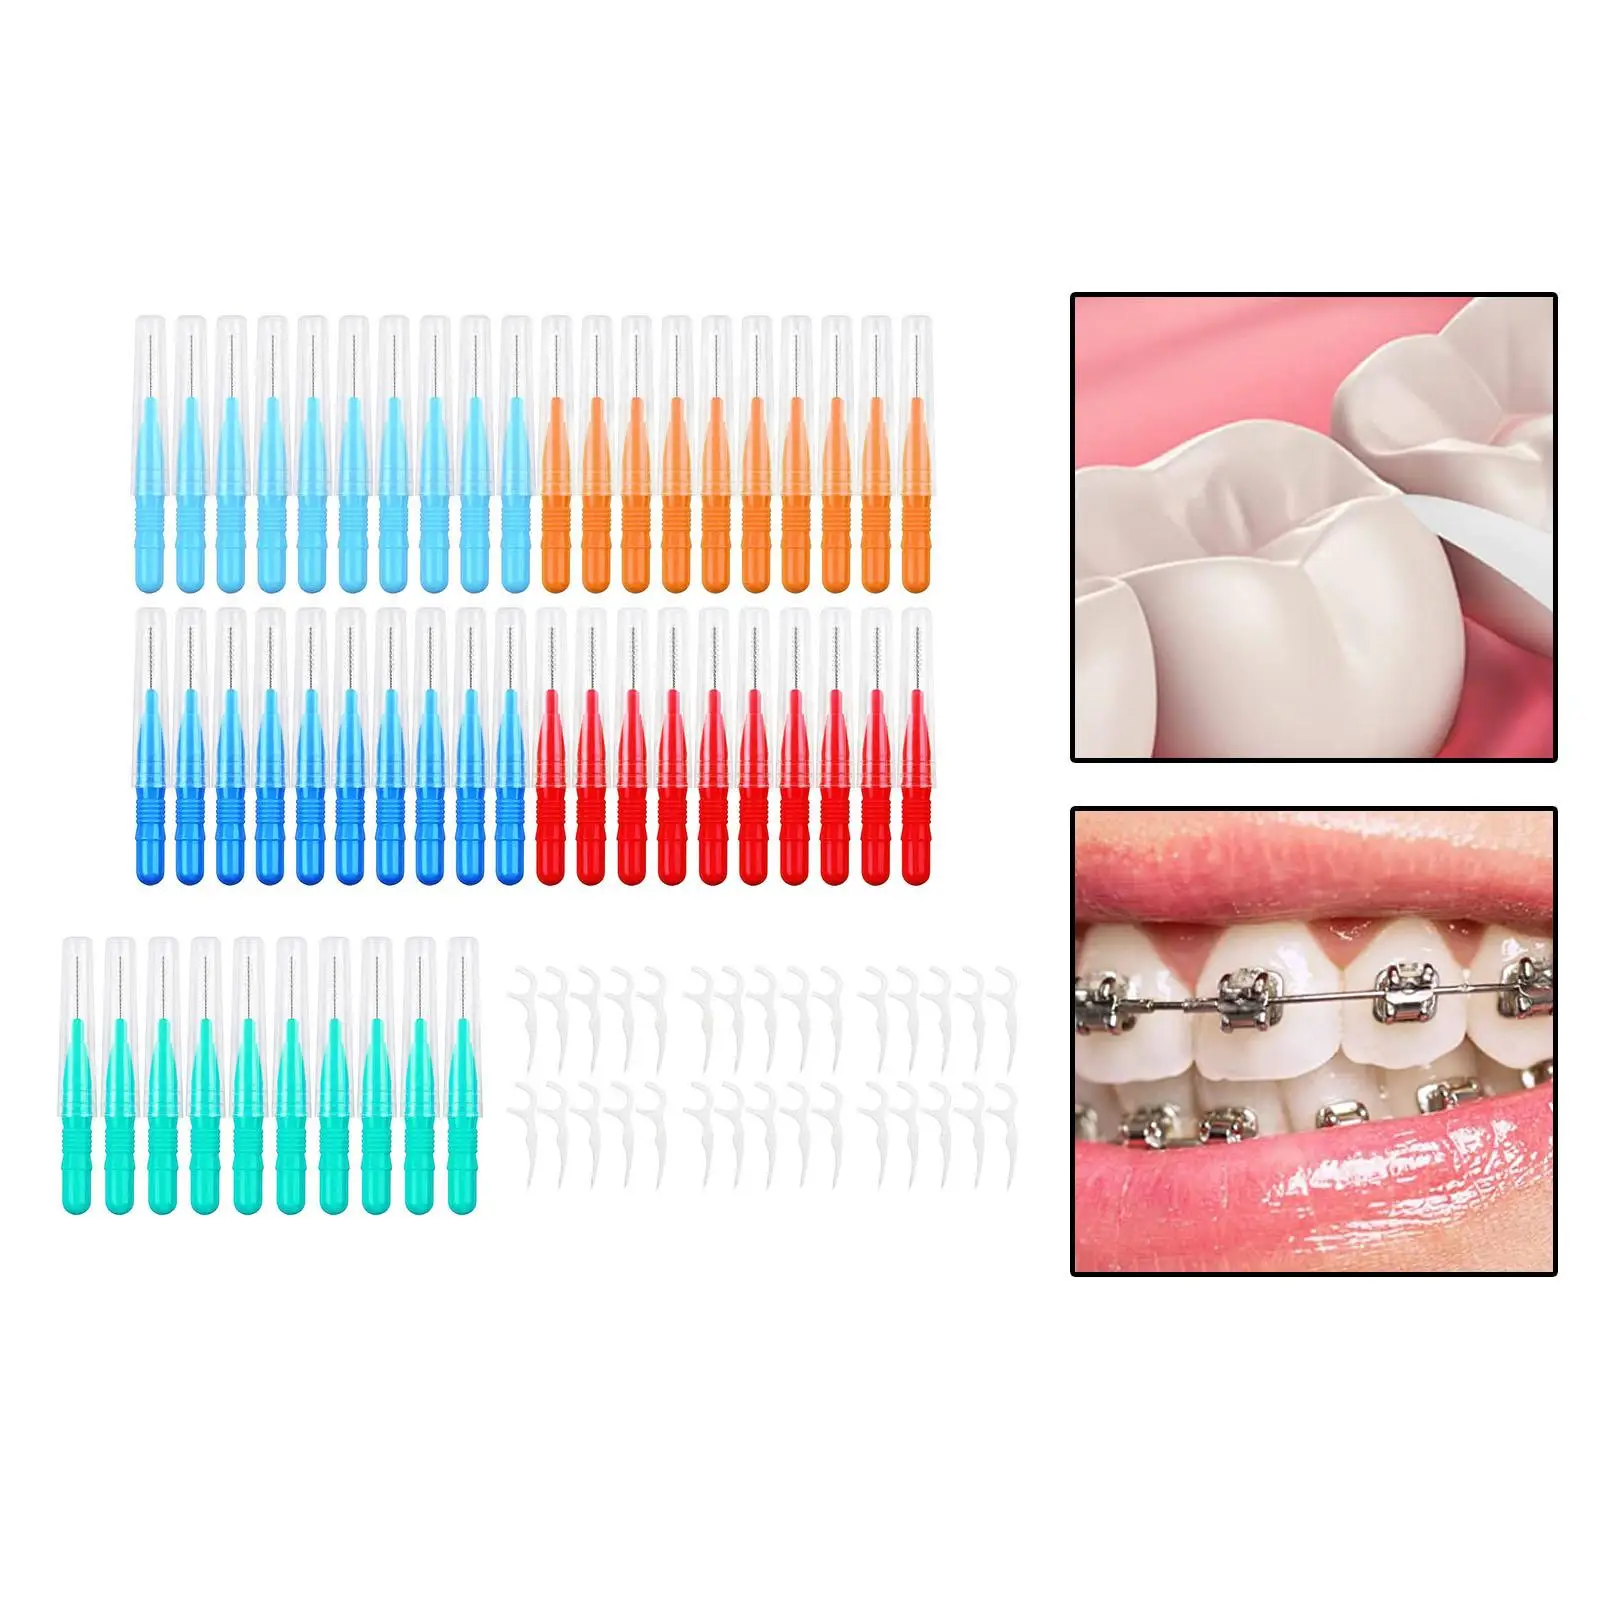 50Pcs Interdental Brushes Tooth Cleaning 30x Dental Floss Flossers